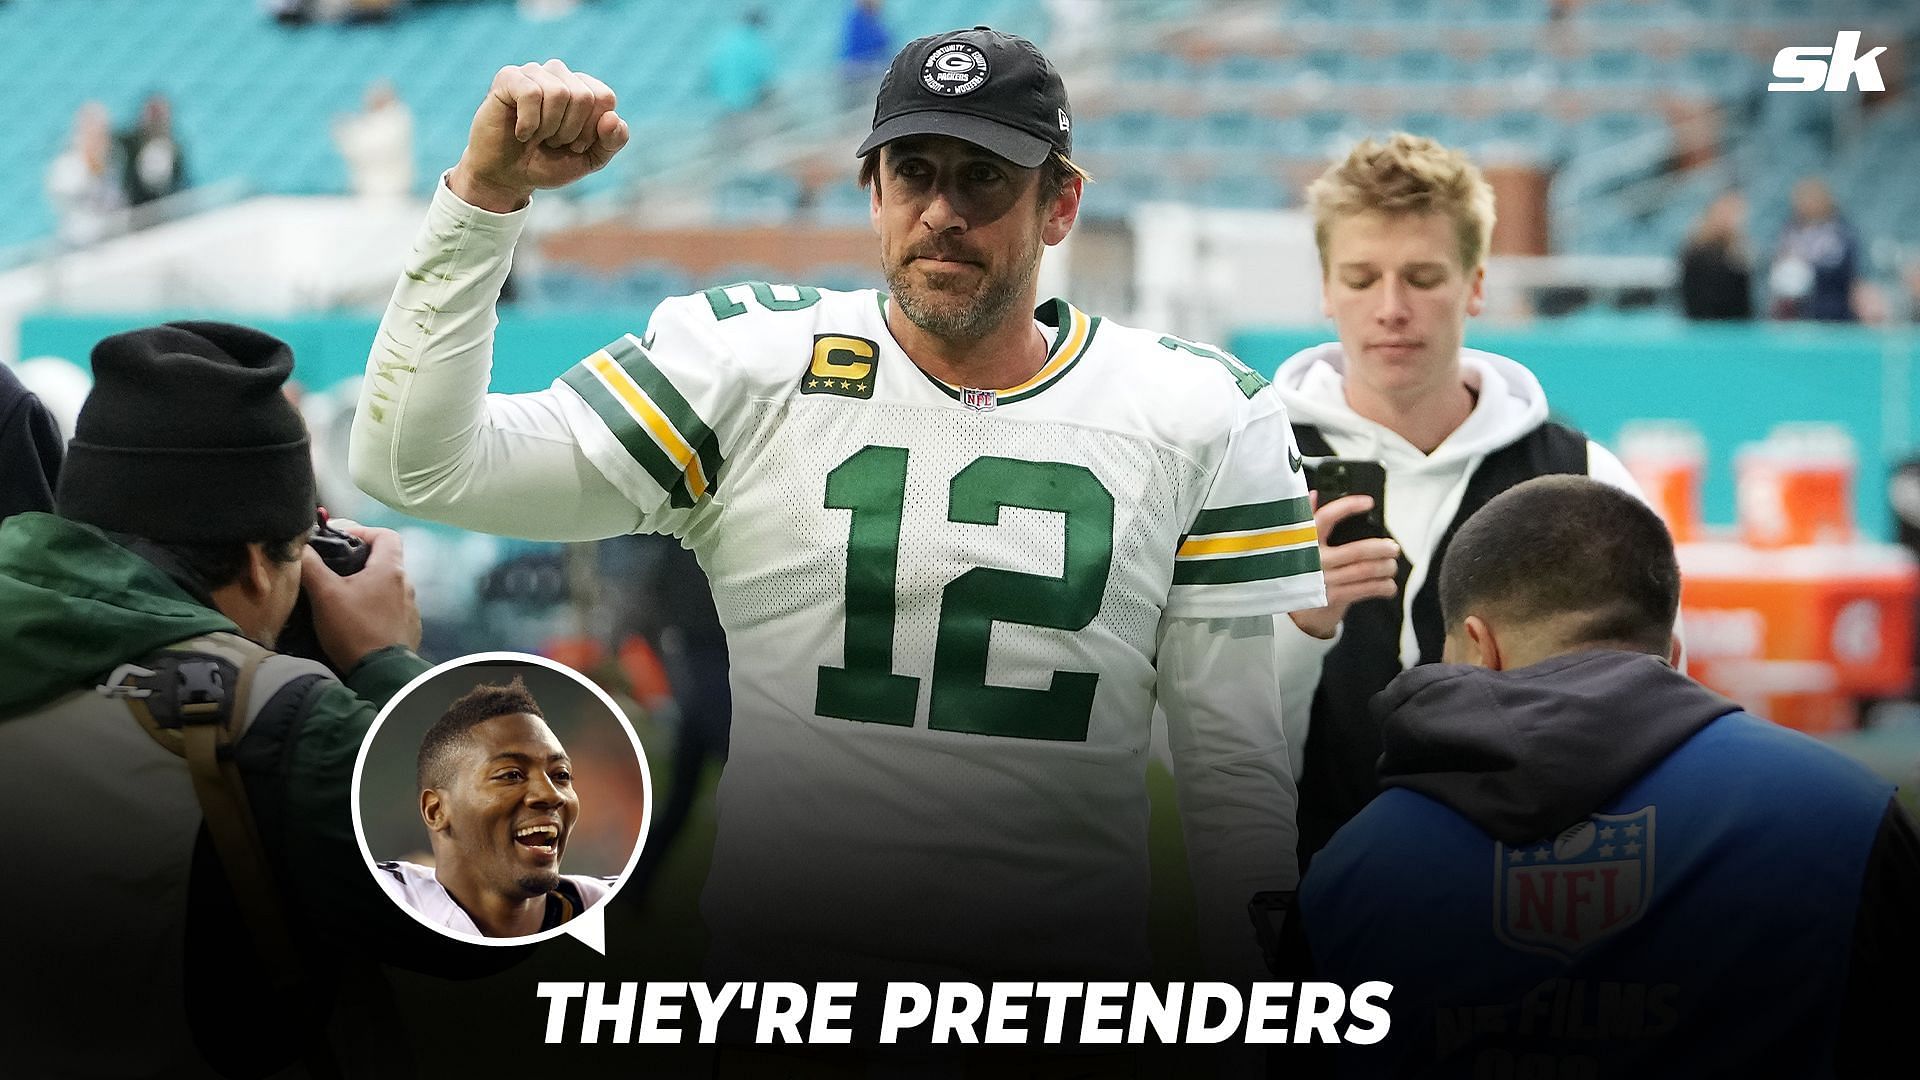 Ryan Clark claims Aaron Rodgers&rsquo; Packers aren&rsquo;t scaring any NFL teams despite having playoffs within reach